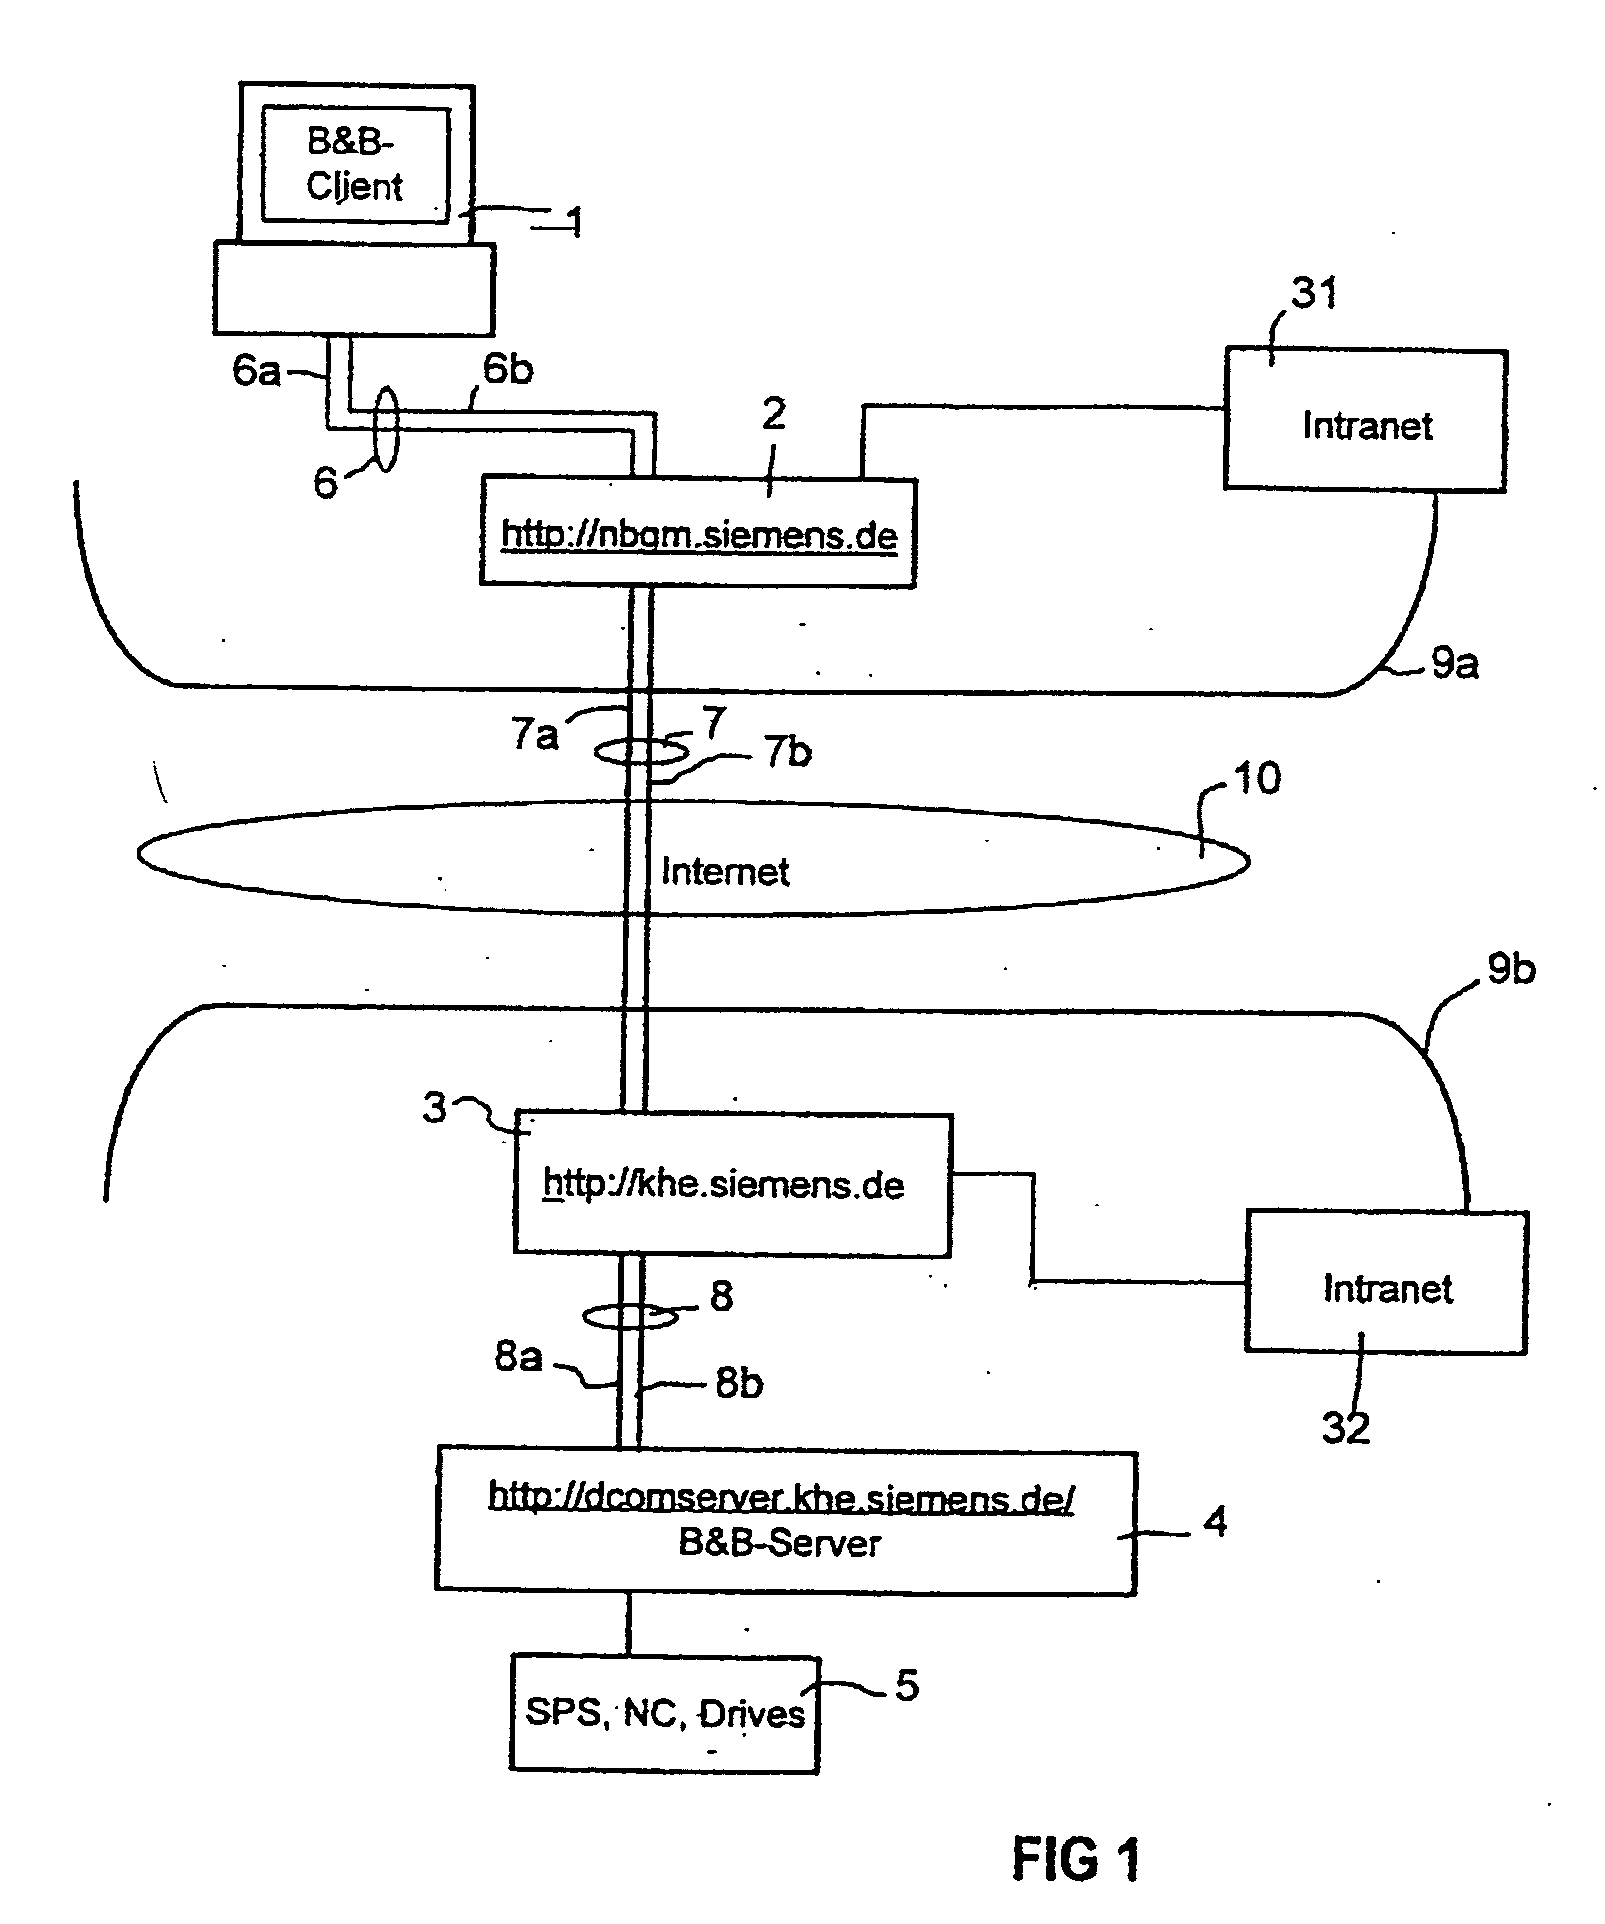 System and method for the operator control and for the monitoring of an automation system over the internet using an asymmetric internet connection